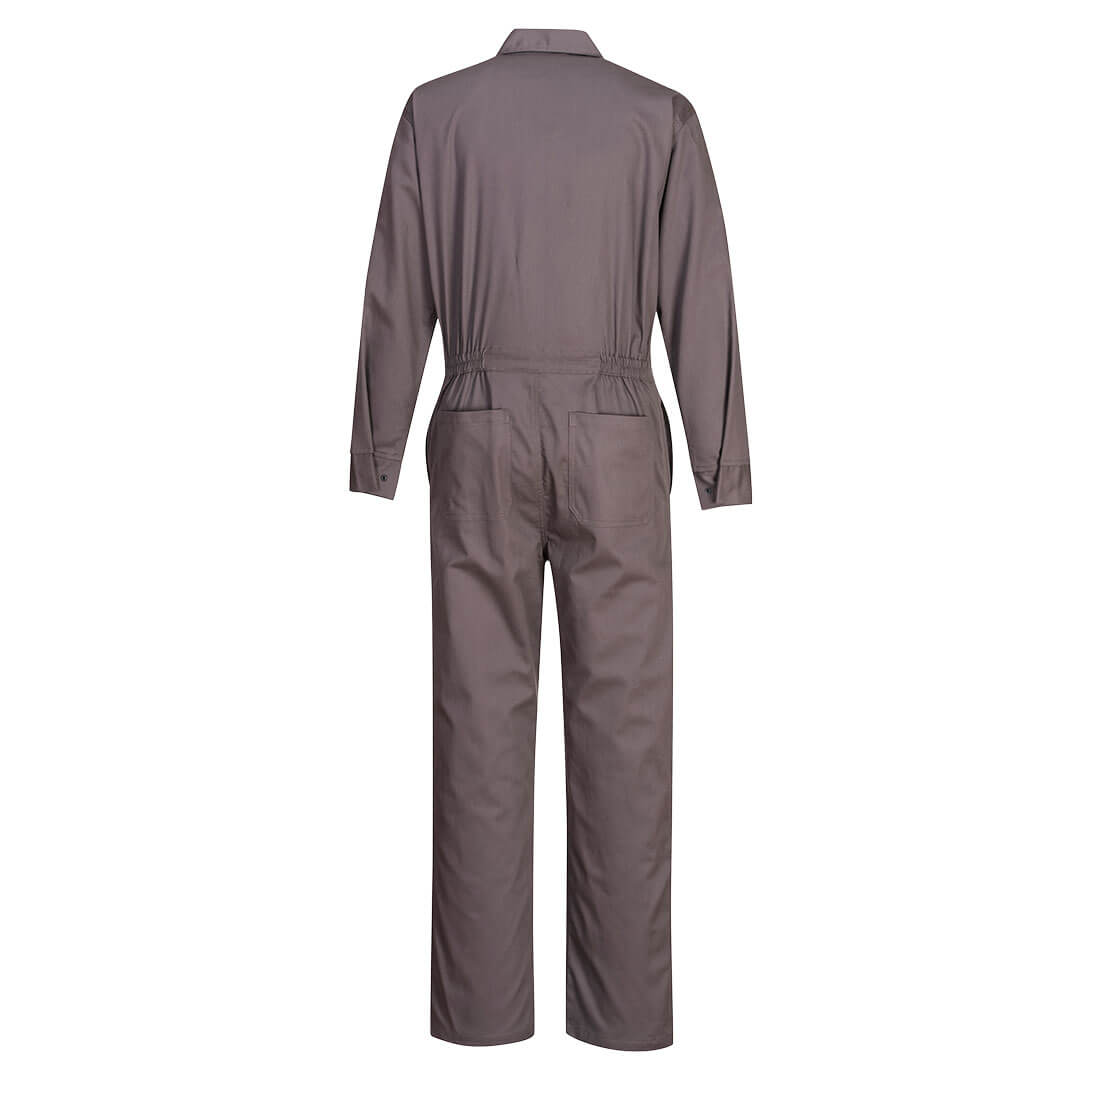 UFR87 Portwest® Bizflame® 88/12 FR/AR Classic Coverall - Gray